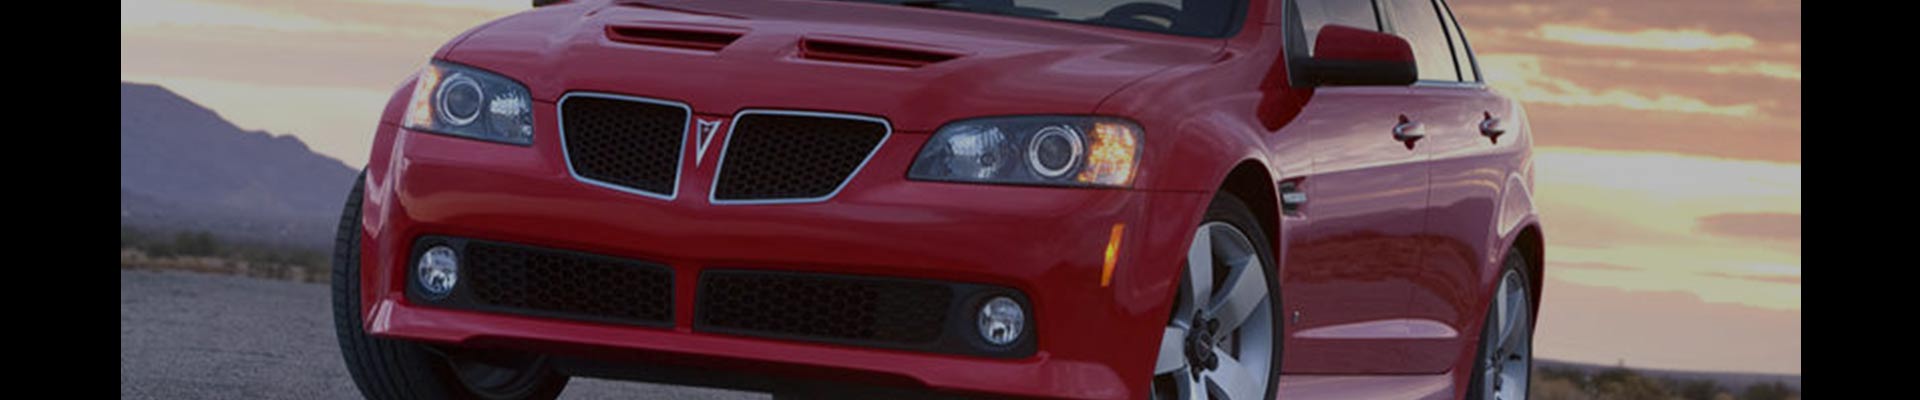 Shop Replacement and OEM 2009 Pontiac G8 Parts with Discounted Price on the Net